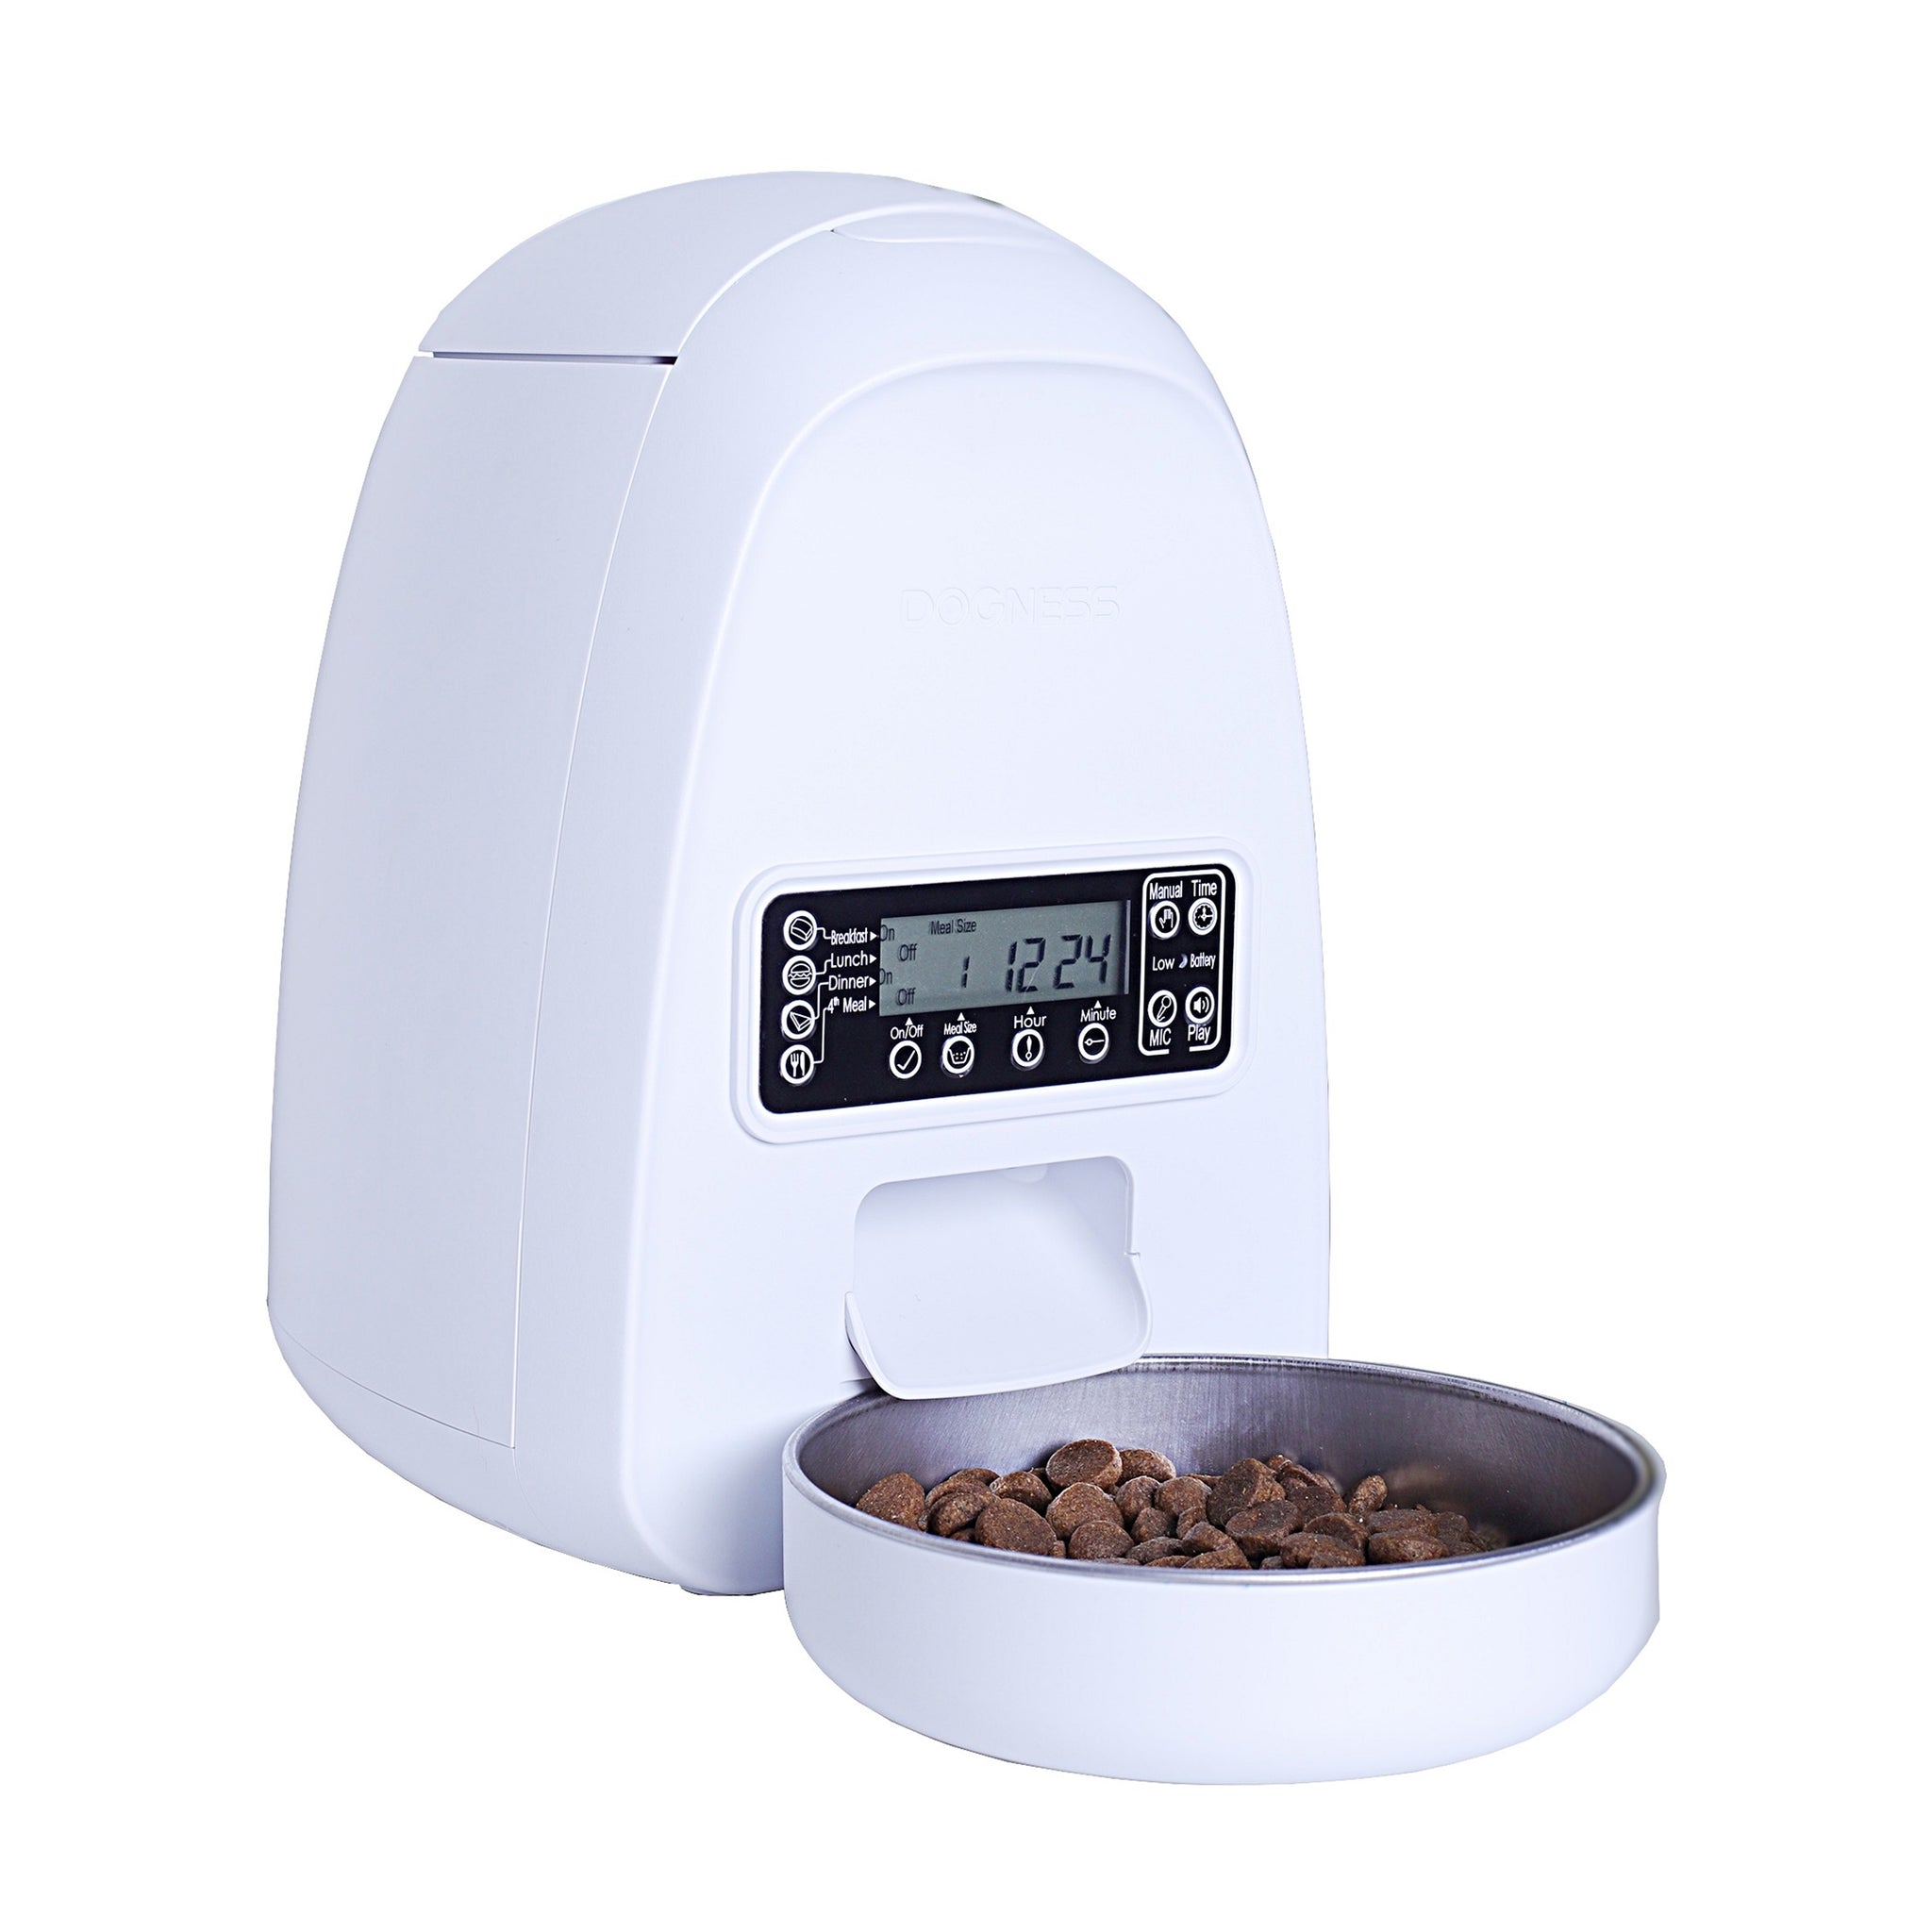 The 10 Best Automatic Dog Feeders to Simplify Your Pet's Meals